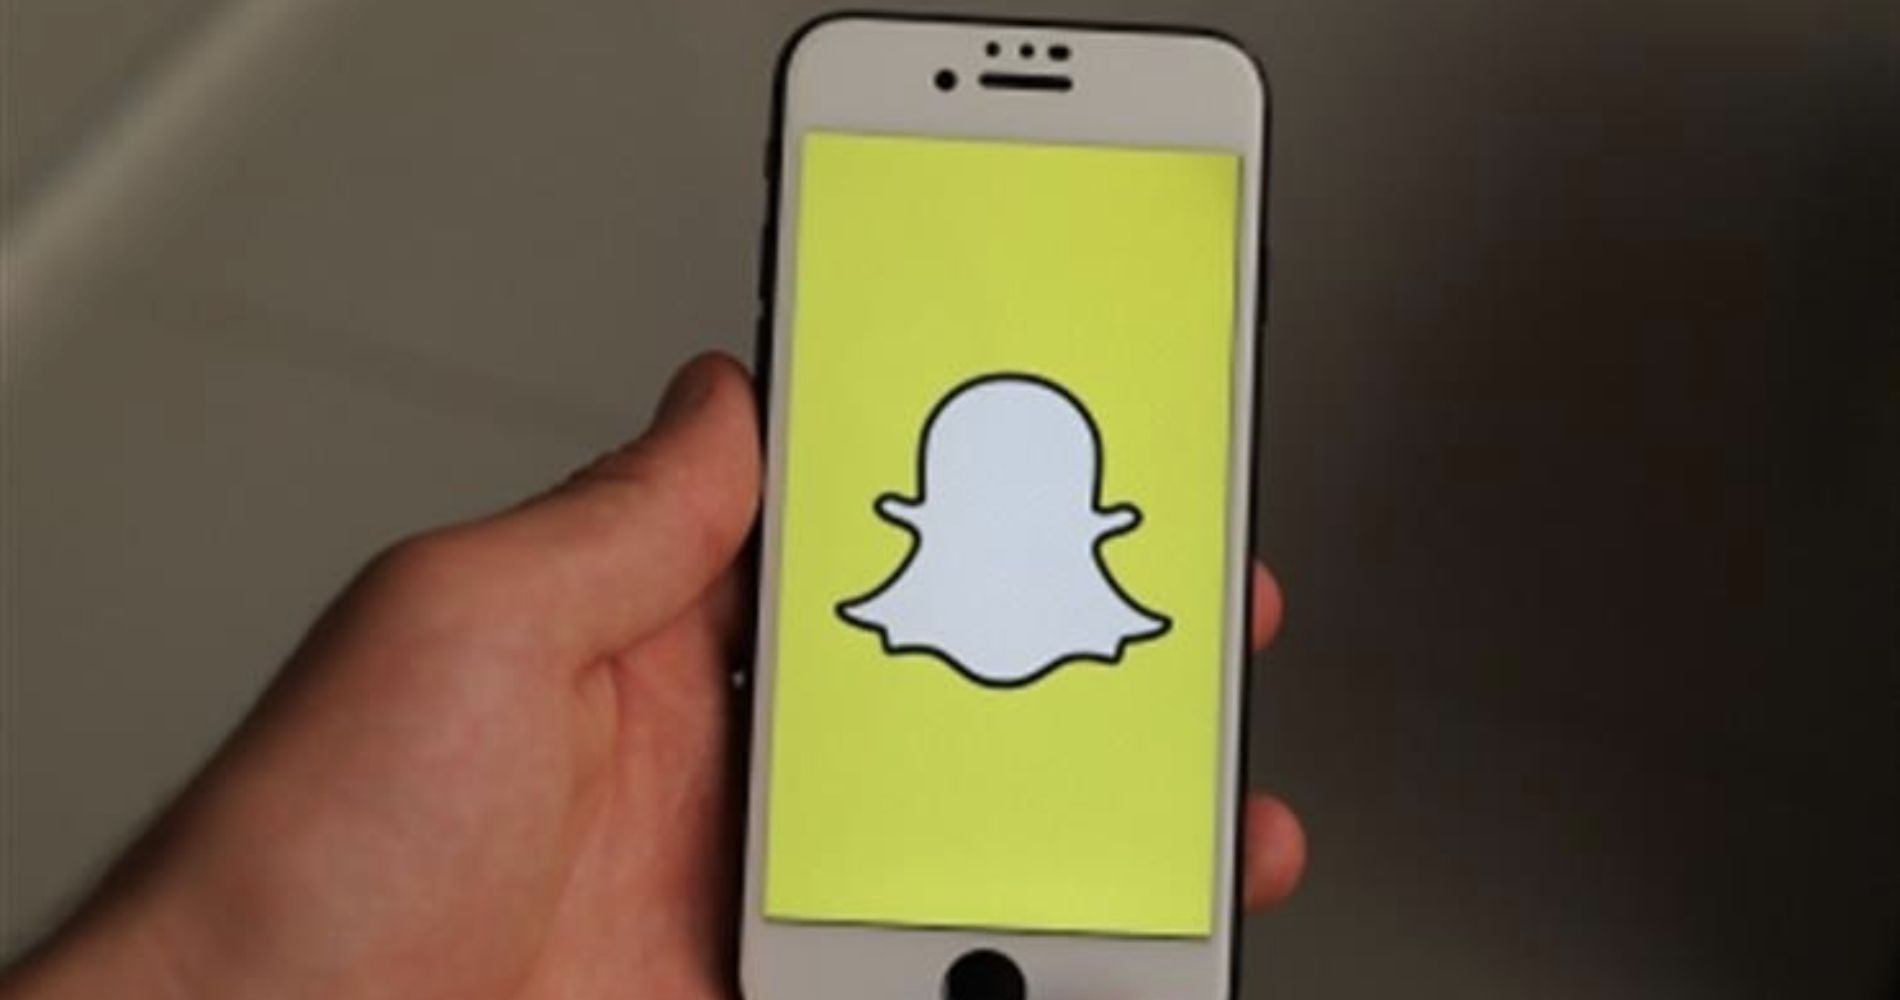 Snapchat has launched Snapchat Sounds Creator Fund, to support emerging